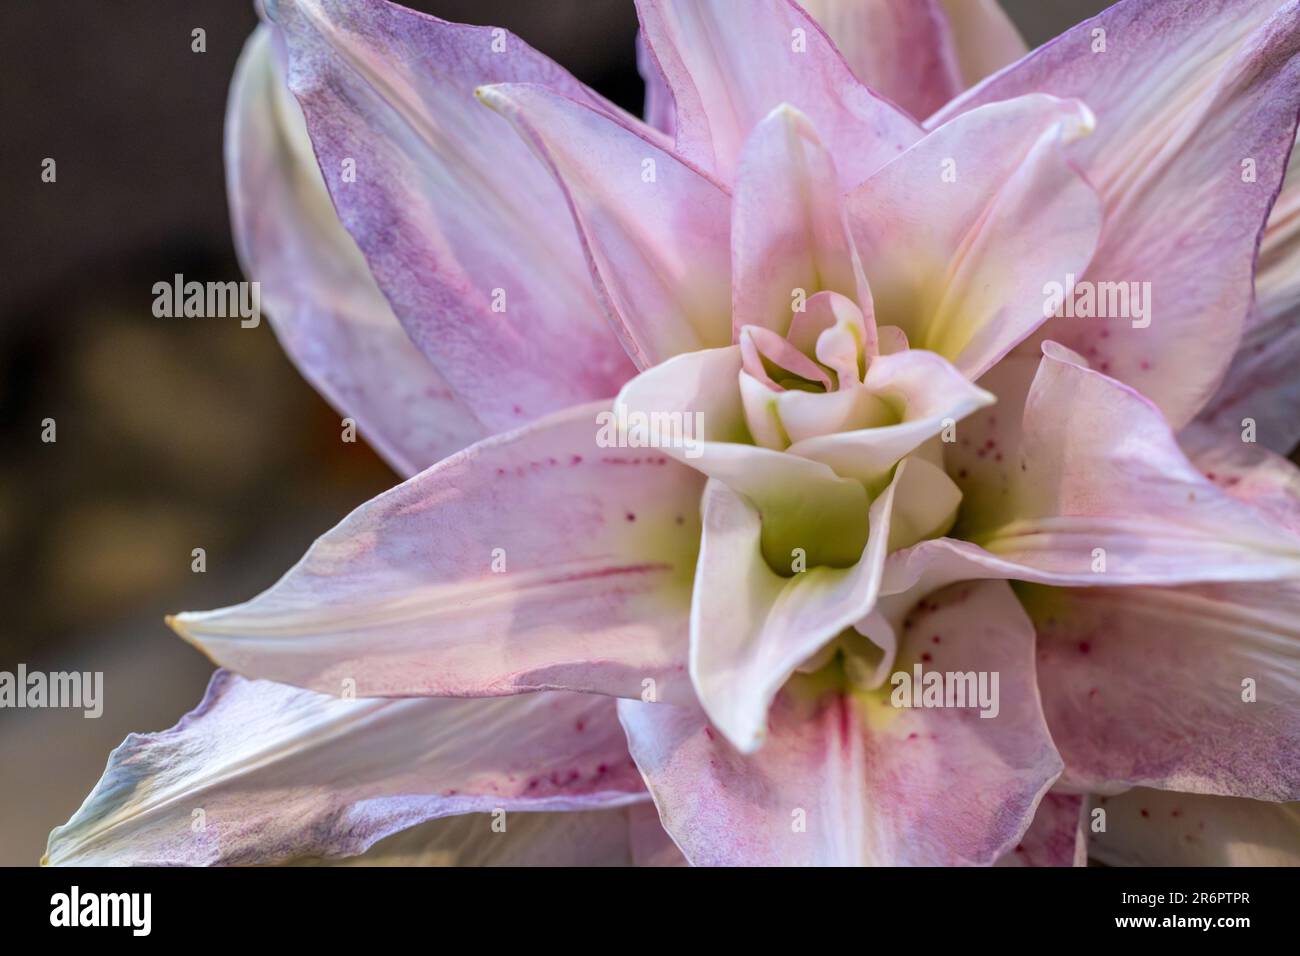 Close-up view of pinkish white flower of the oriental lily Stock Photo